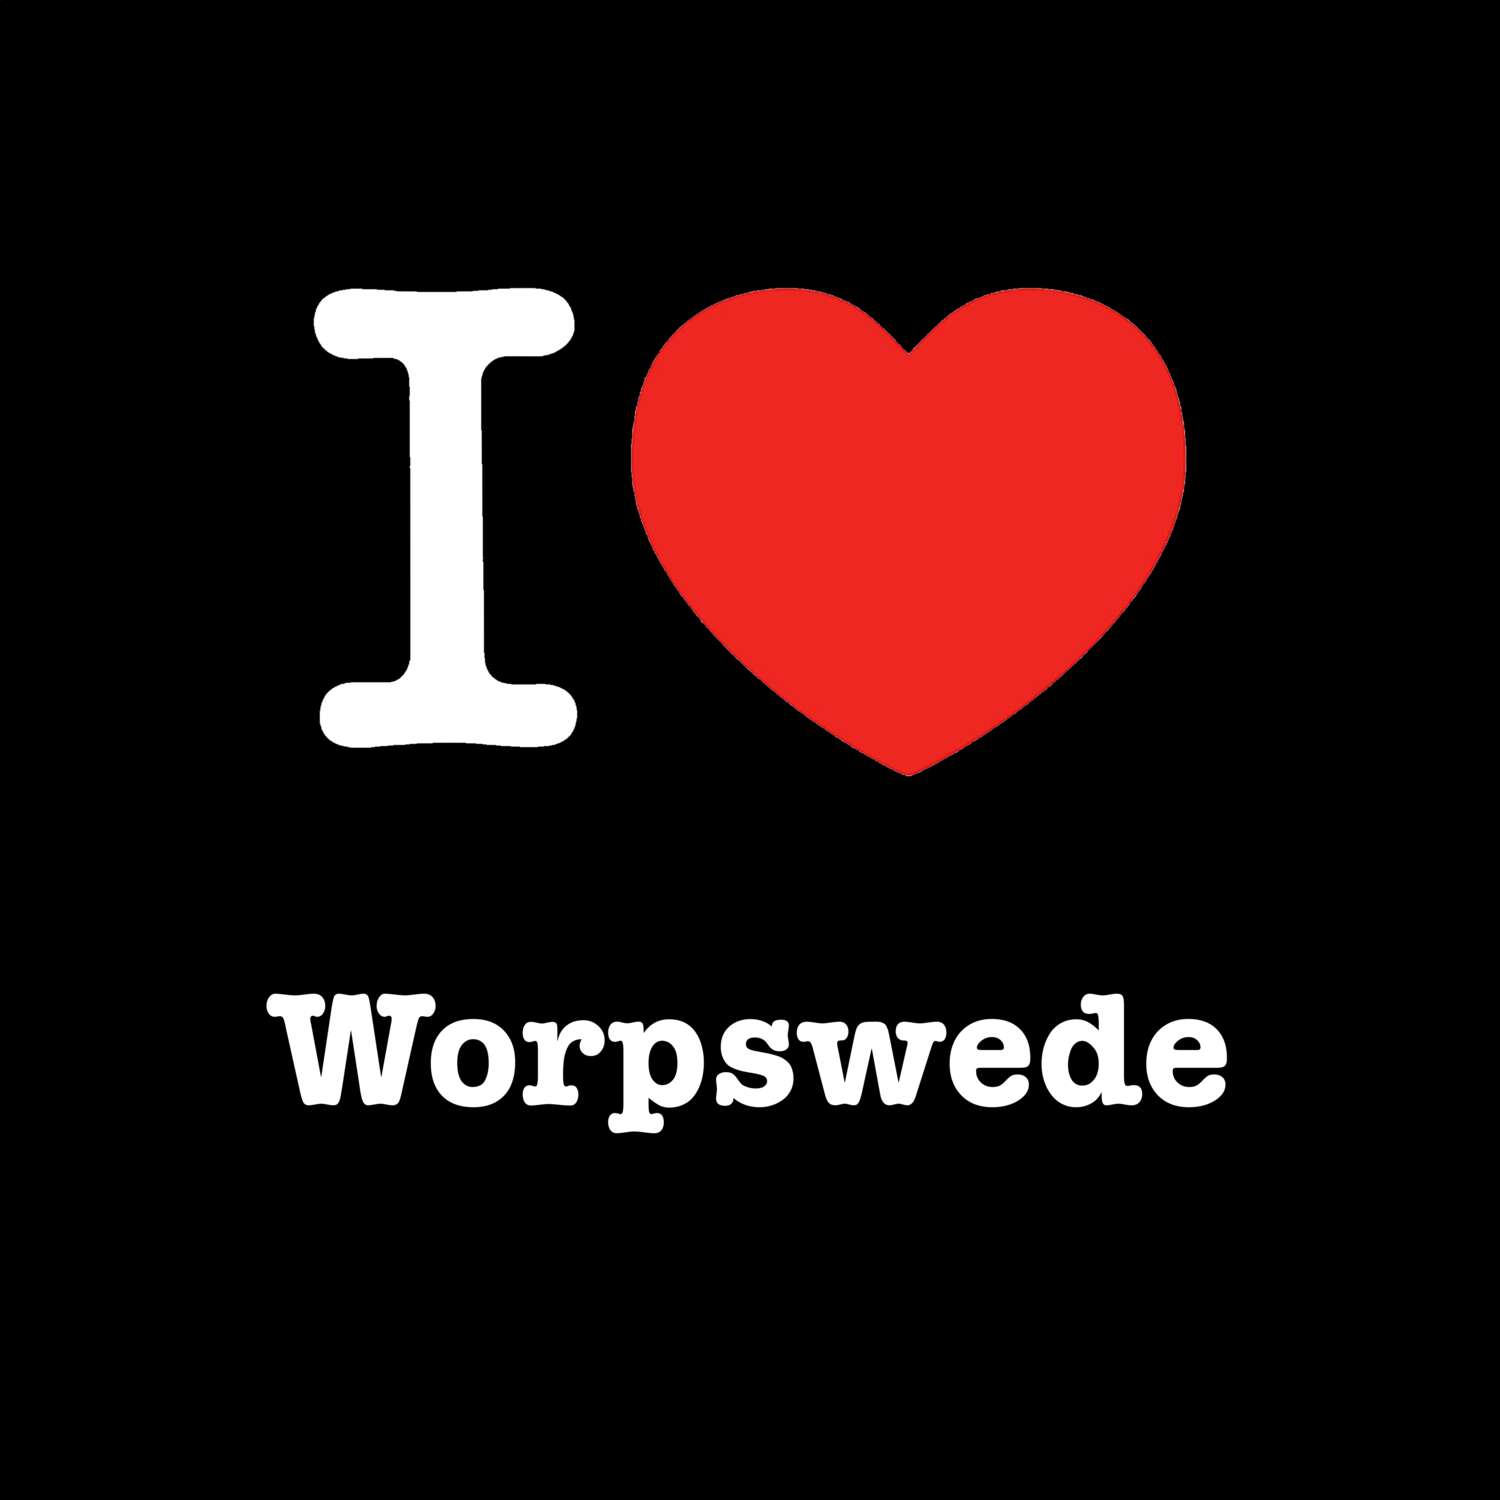 Worpswede T-Shirt »I love«